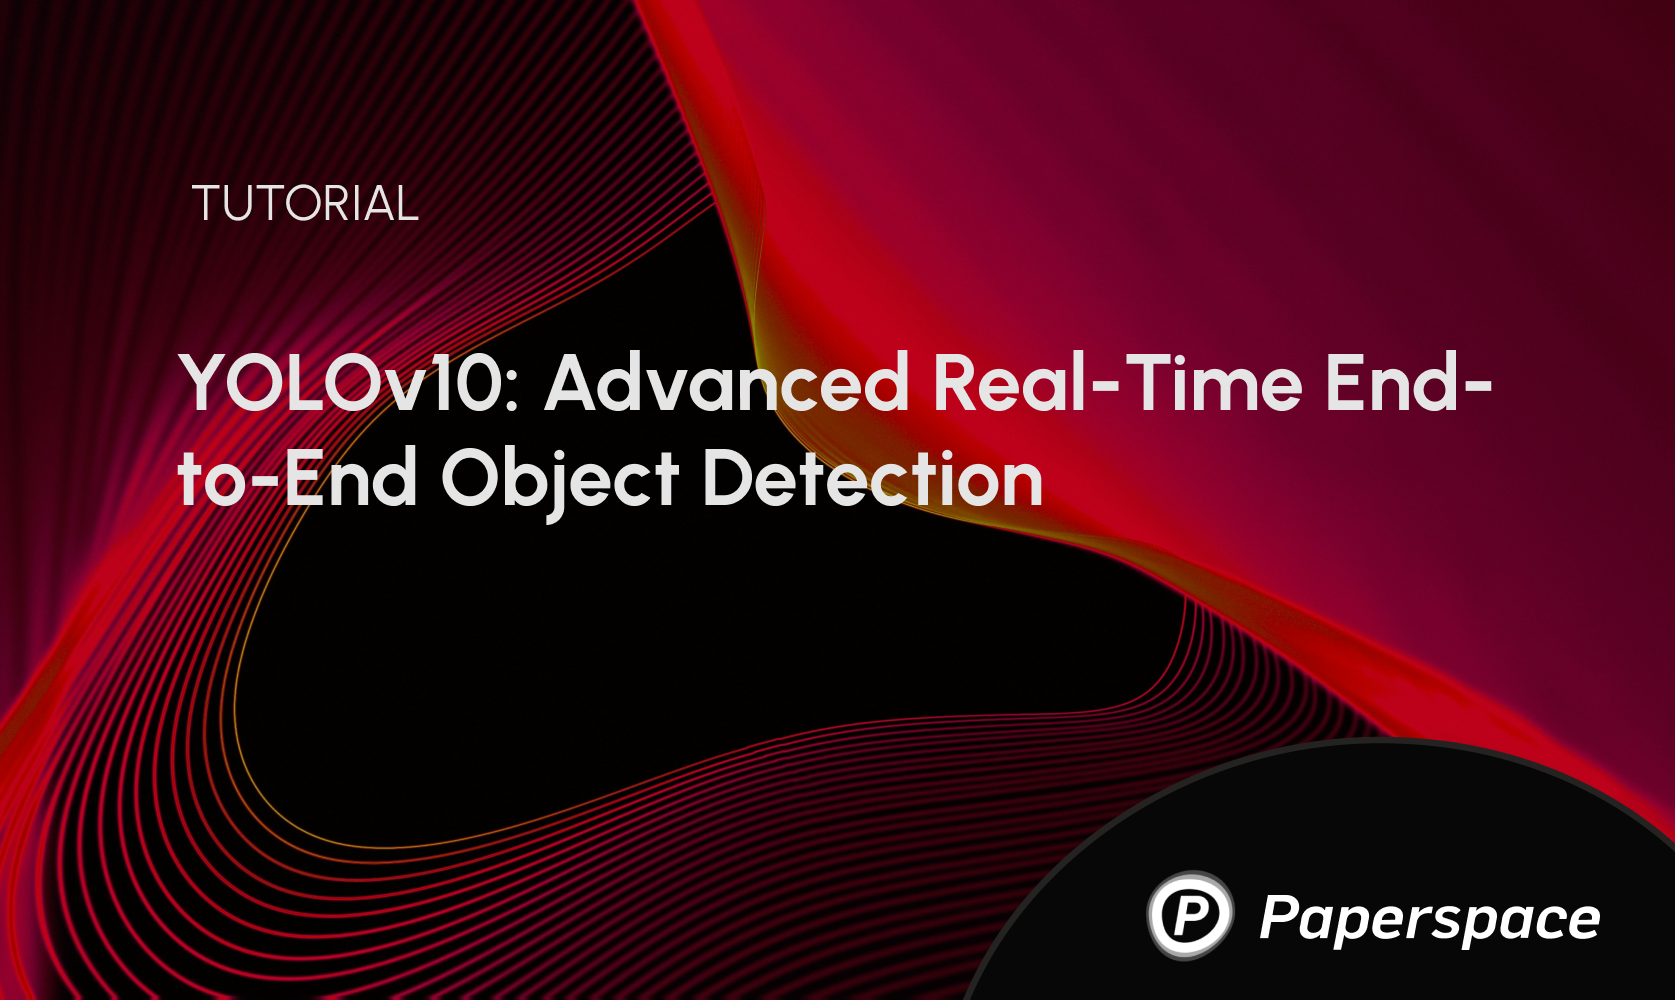 Real-time object detection